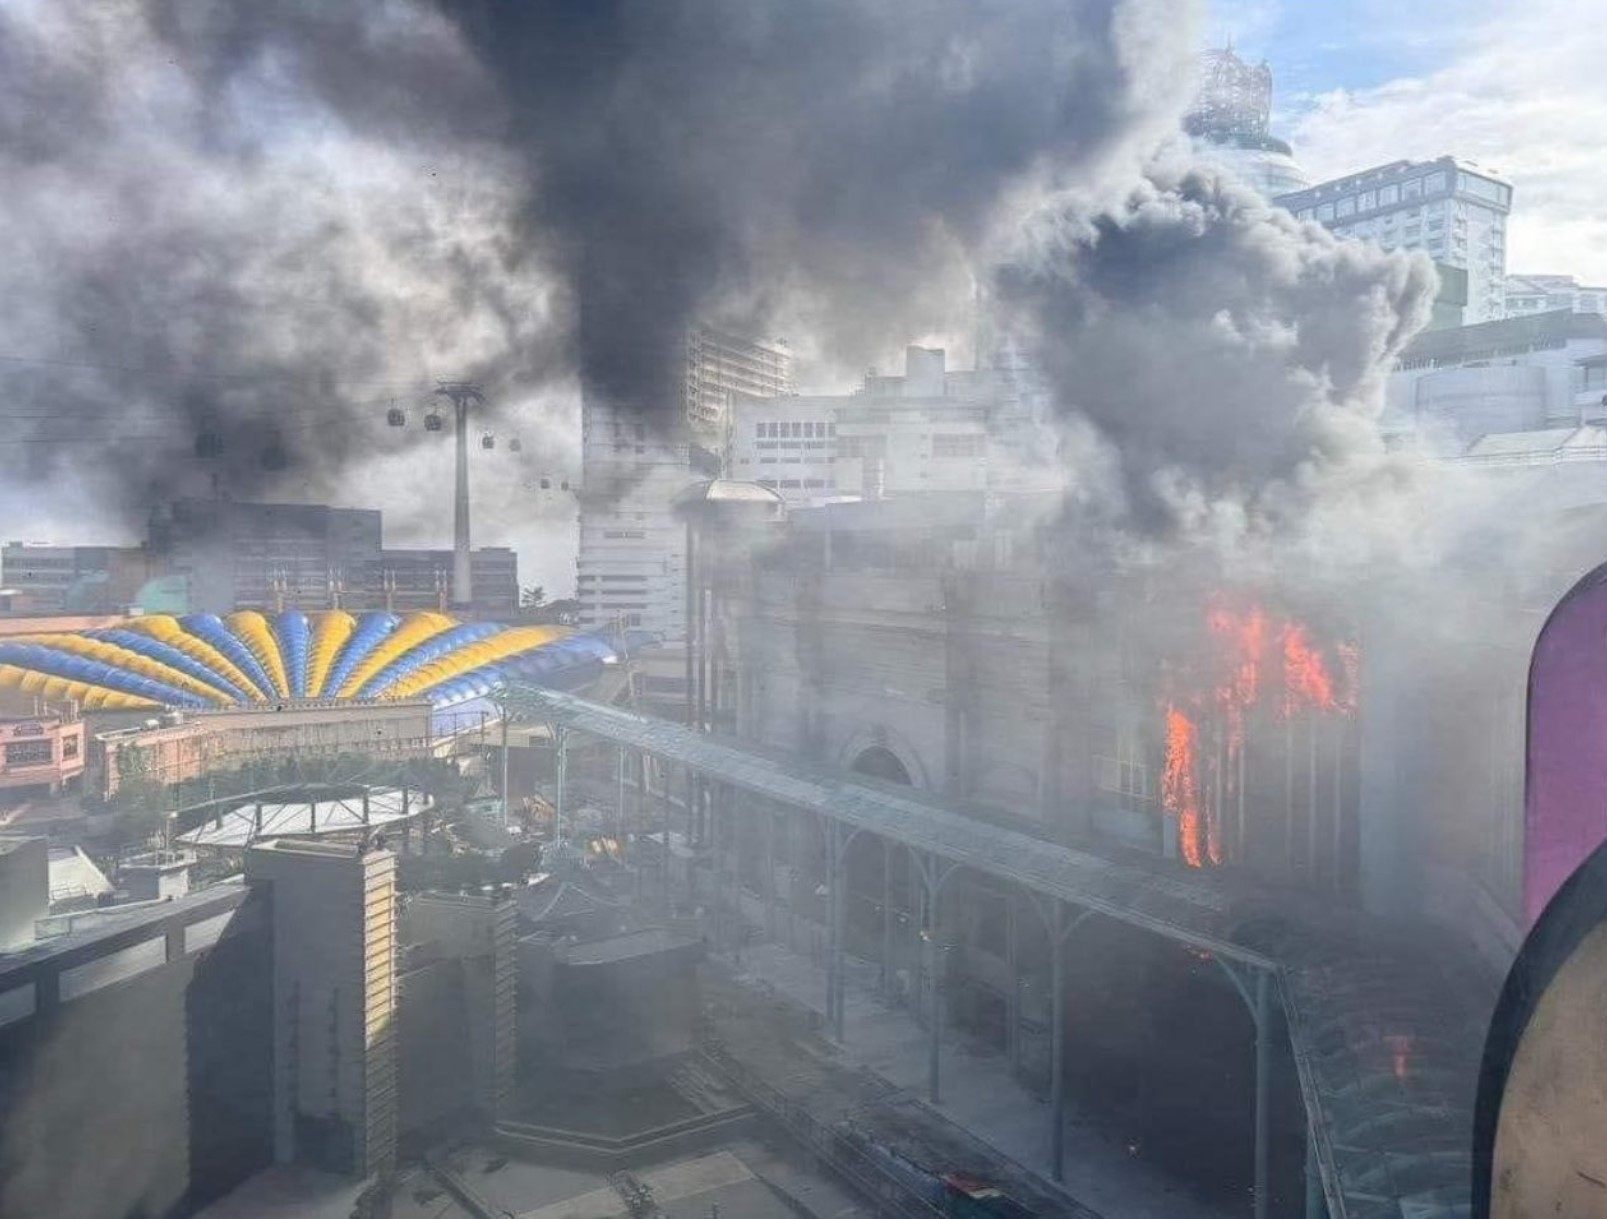 Social media picture of a fire at Genting Highlands in Malaysia. Photo: X/pelabursaham